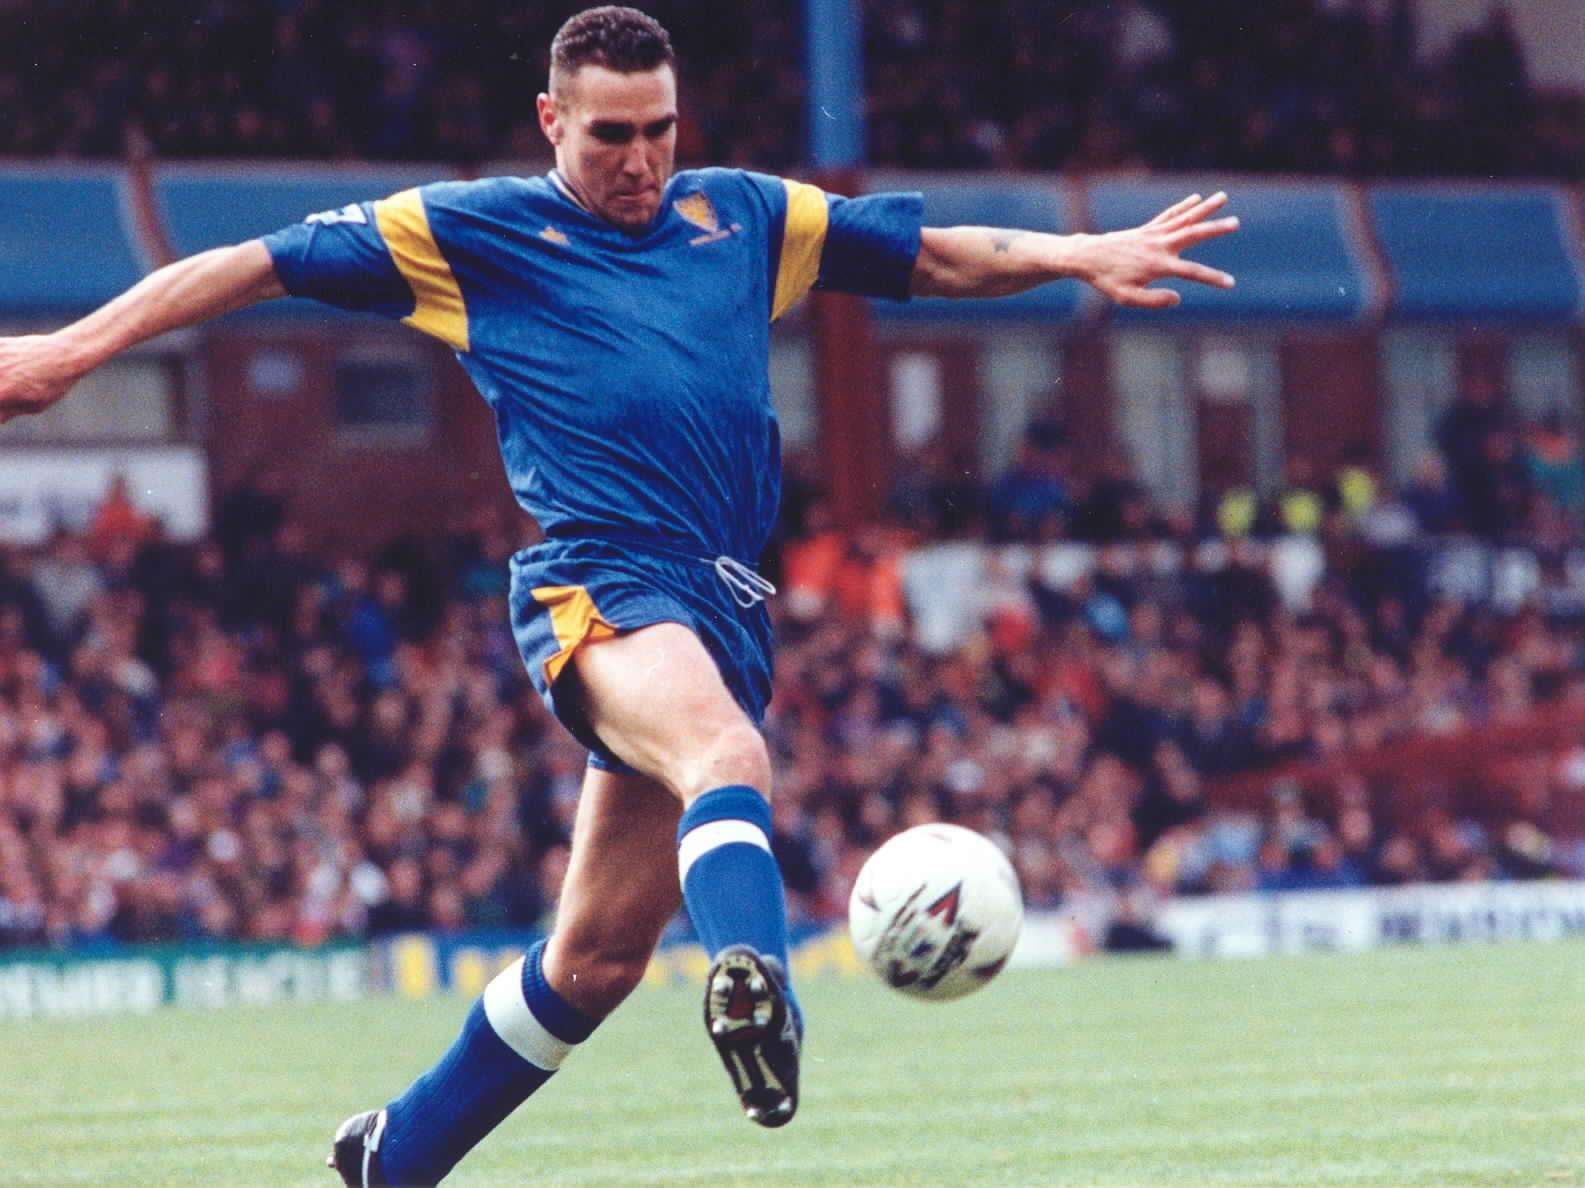 Vinnie Jones was 'one of the nicest fellas' and a talented player